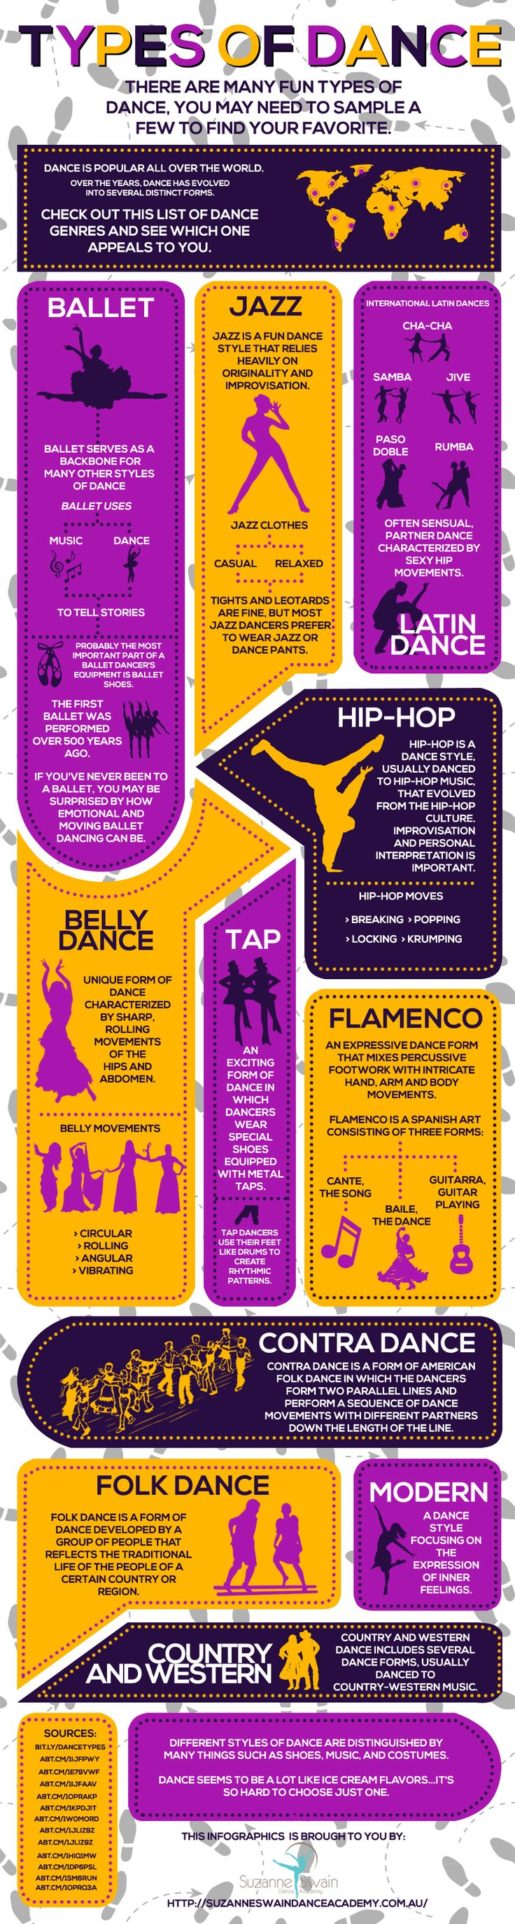 The Most Popular Types of Dancing